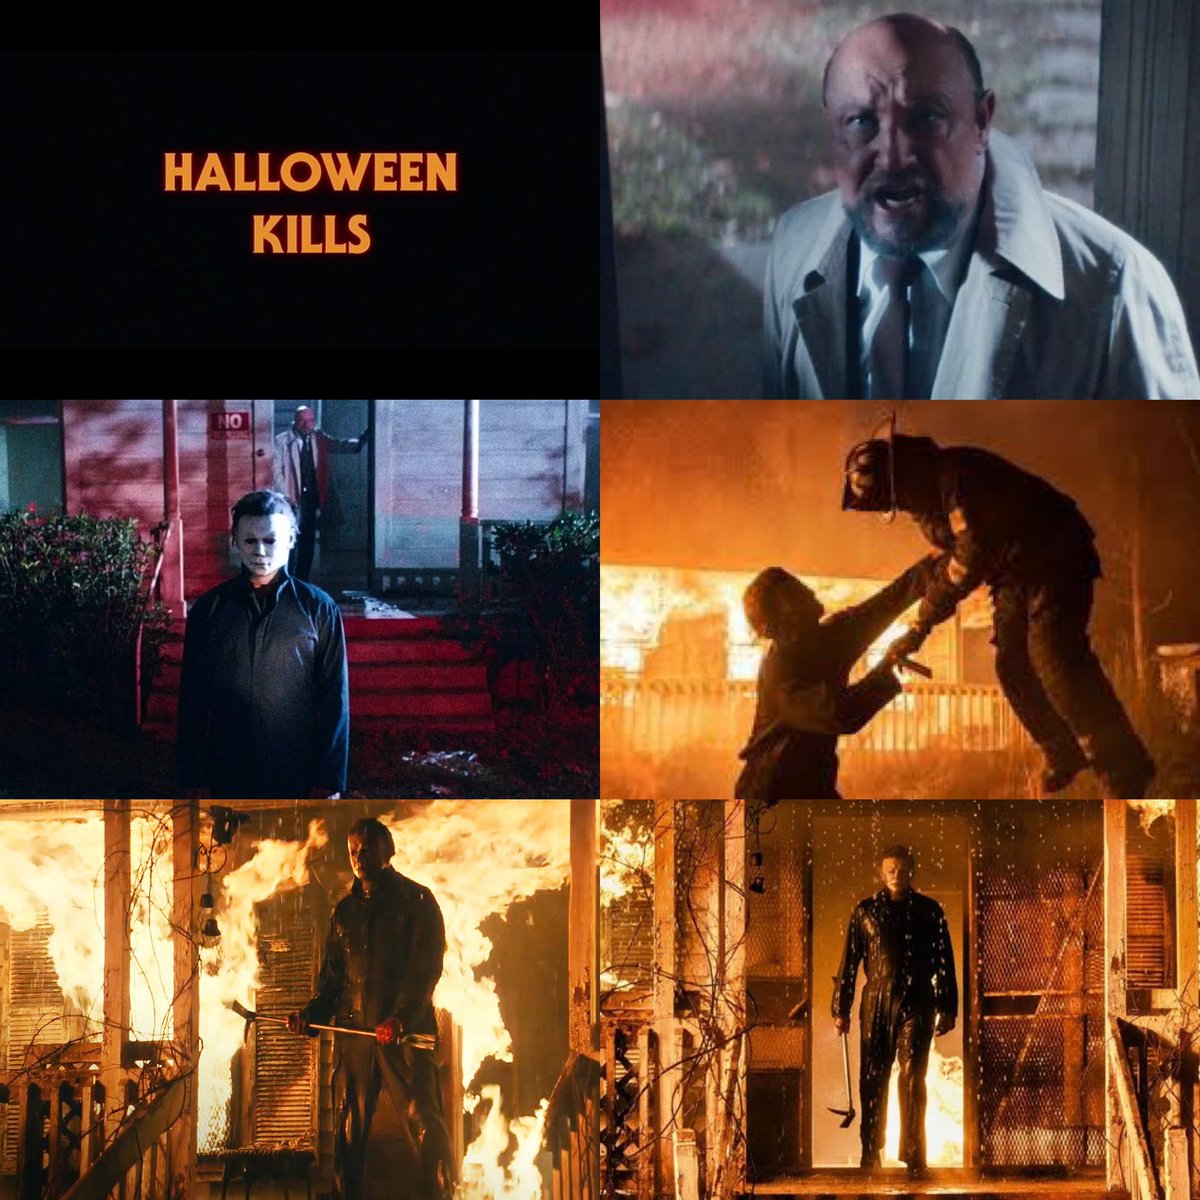 On this day 2 years ago #Halloweenkills was released